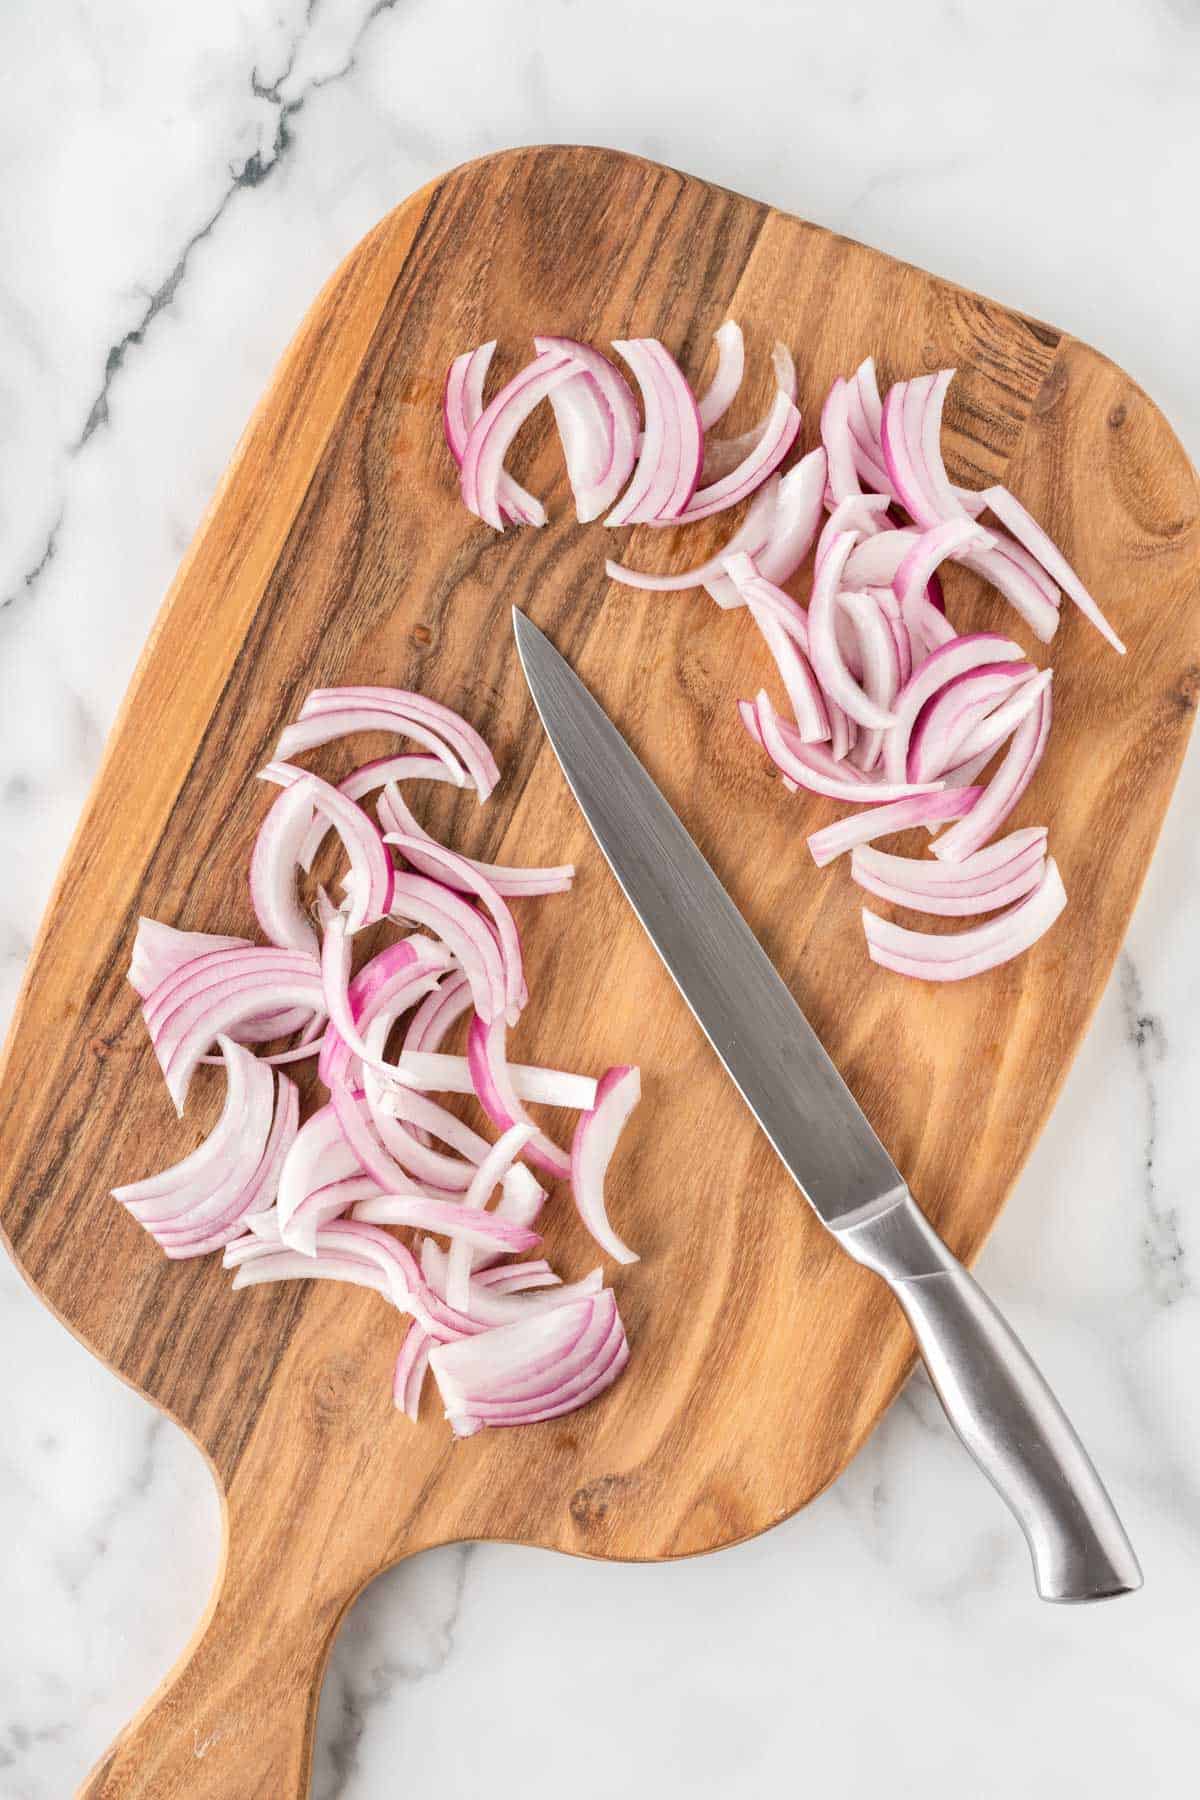 cutting red onion into slices